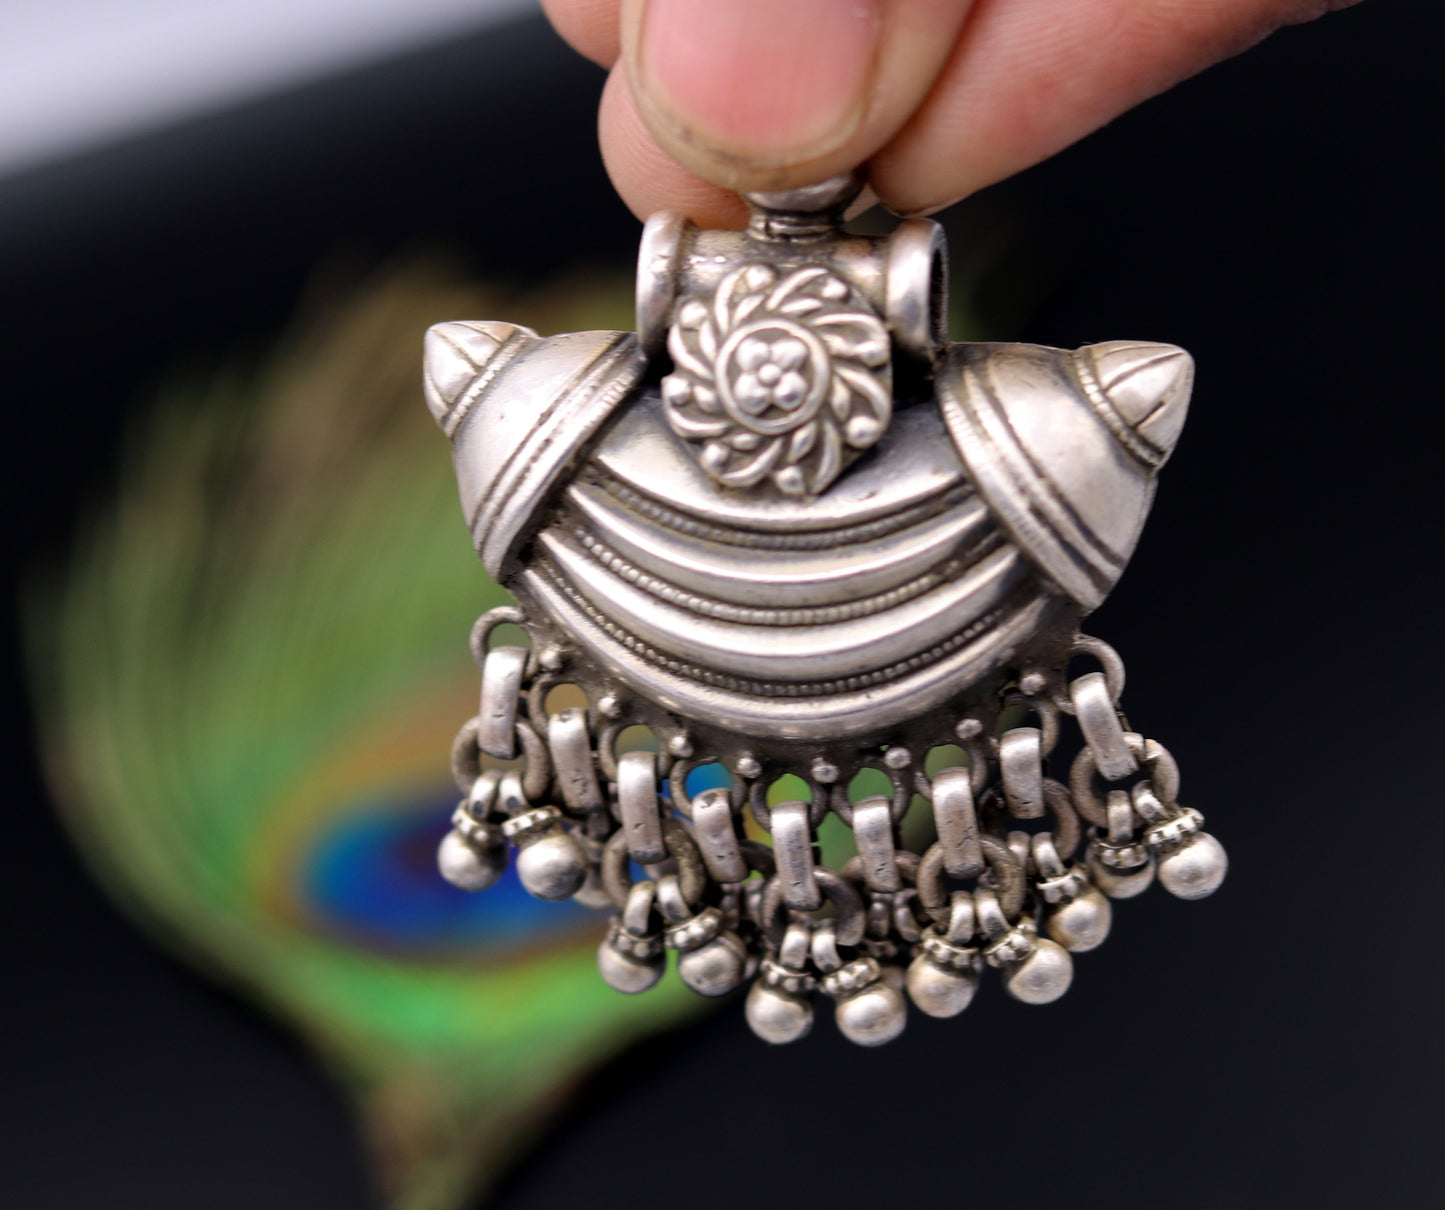 925 sterling silver handmade customized vintage design pretty charm pendant necklace belly dance personalized tribal jewelry gifting nsp394 - TRIBAL ORNAMENTS